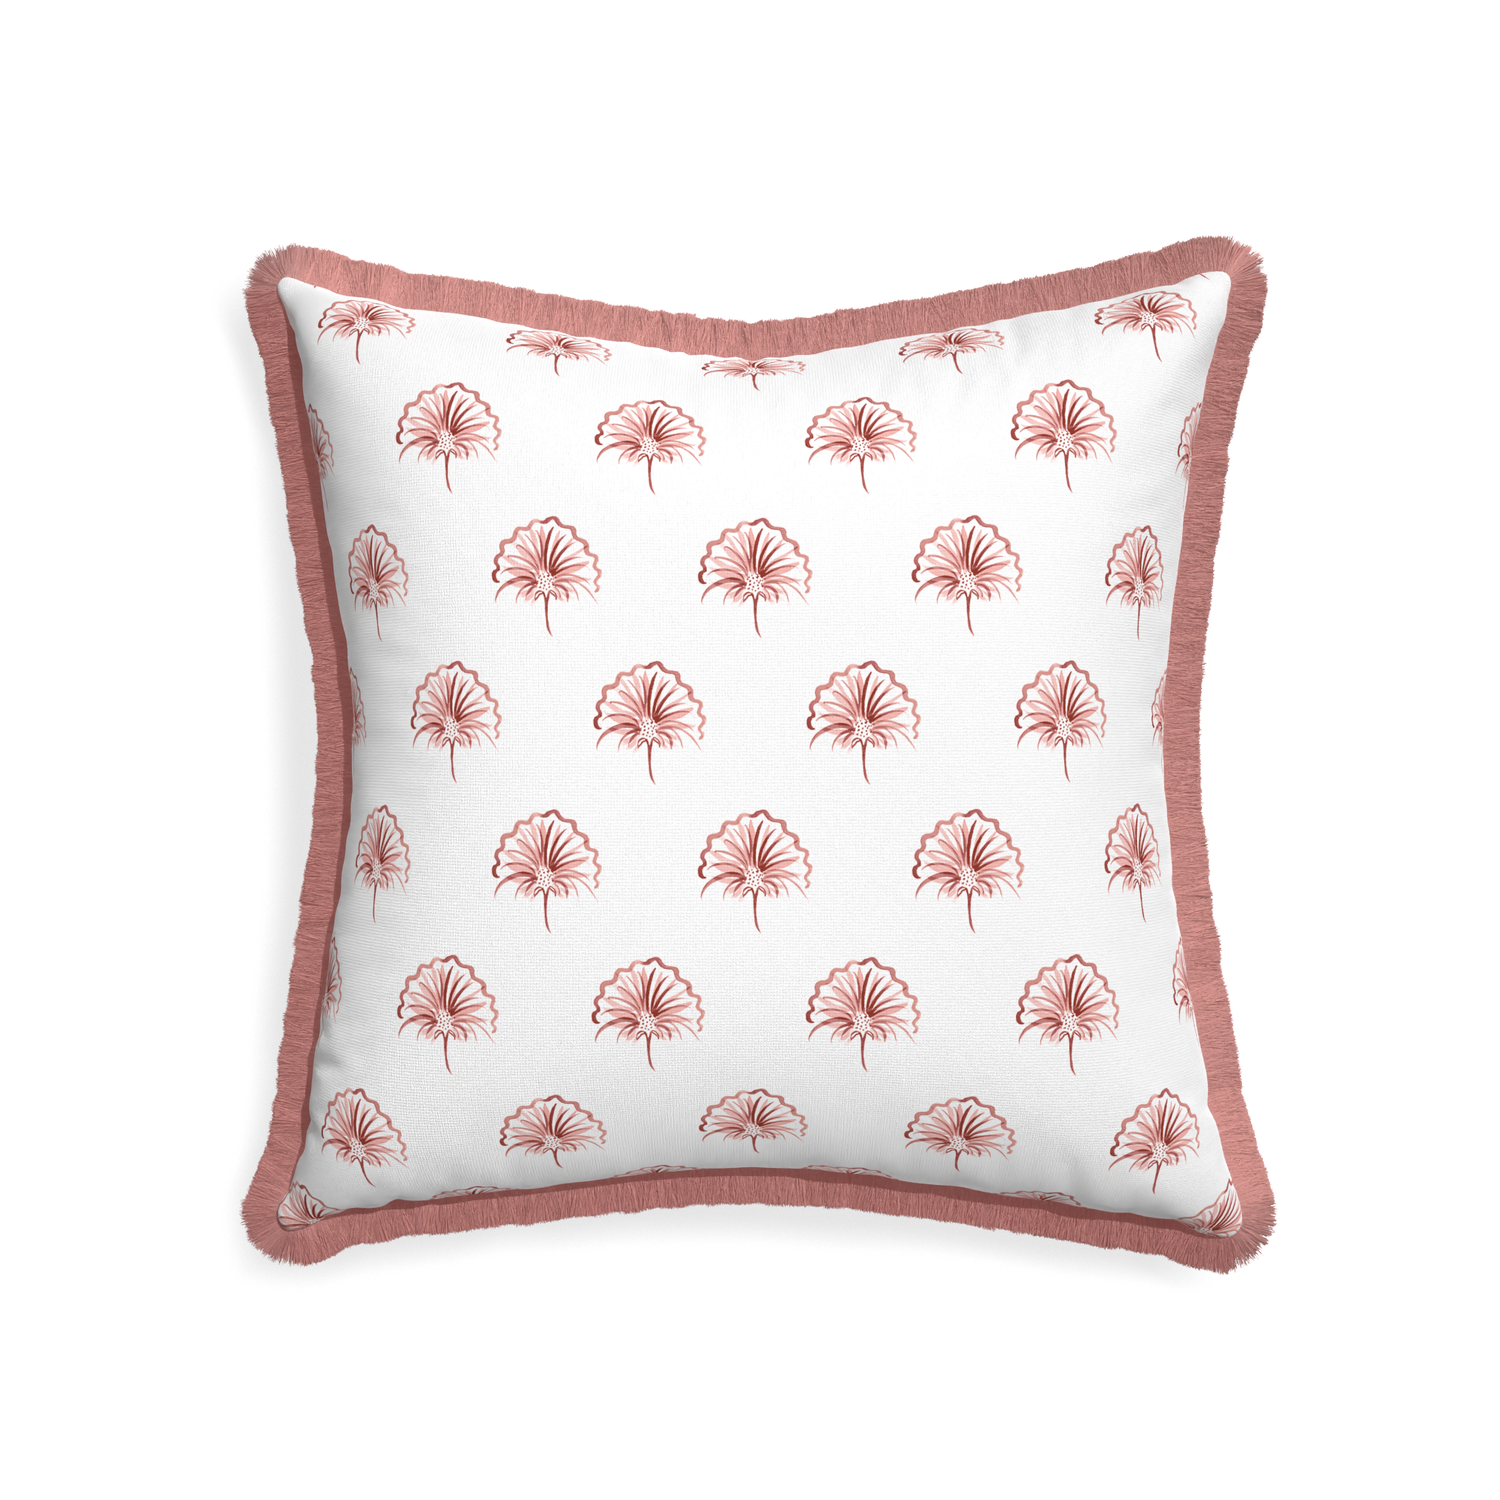 22-square penelope rose custom floral pinkpillow with d fringe on white background